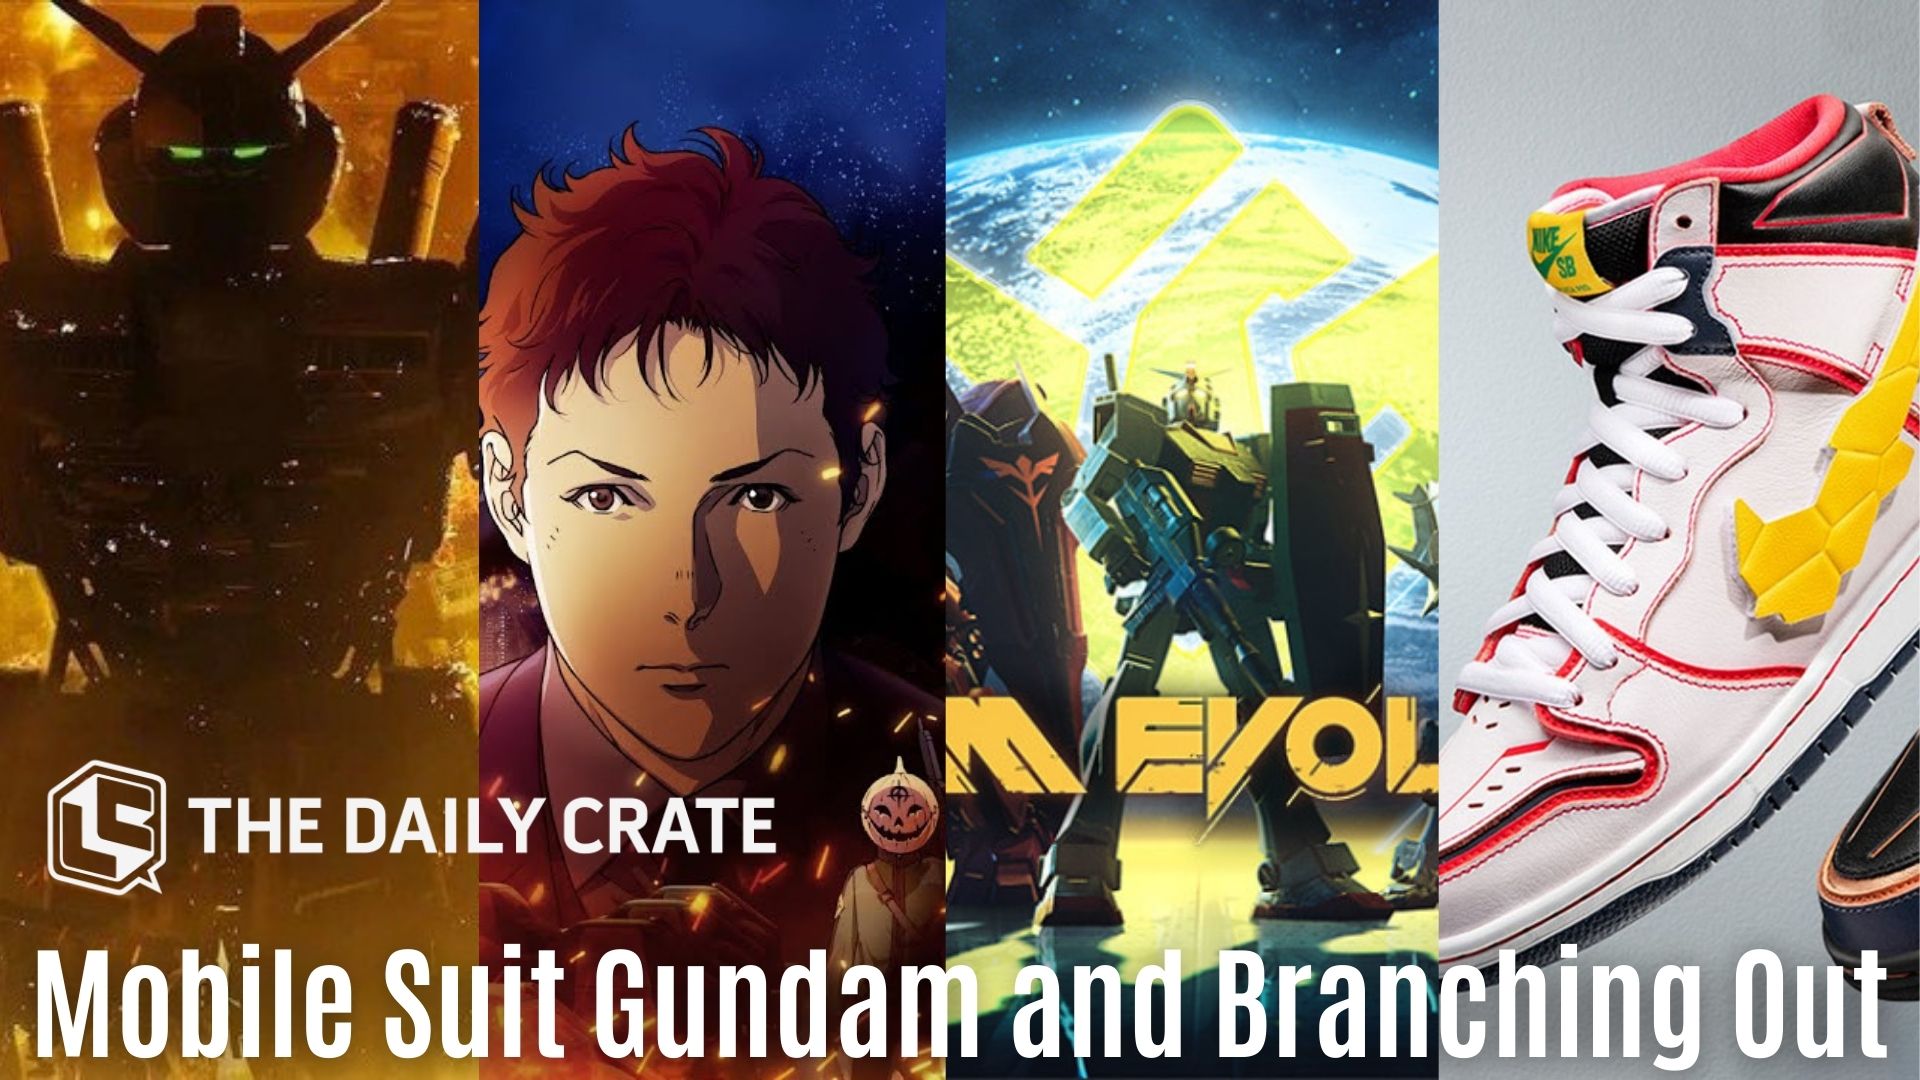 The Daily Crate | Mobile Suit Gundam and Branching Out